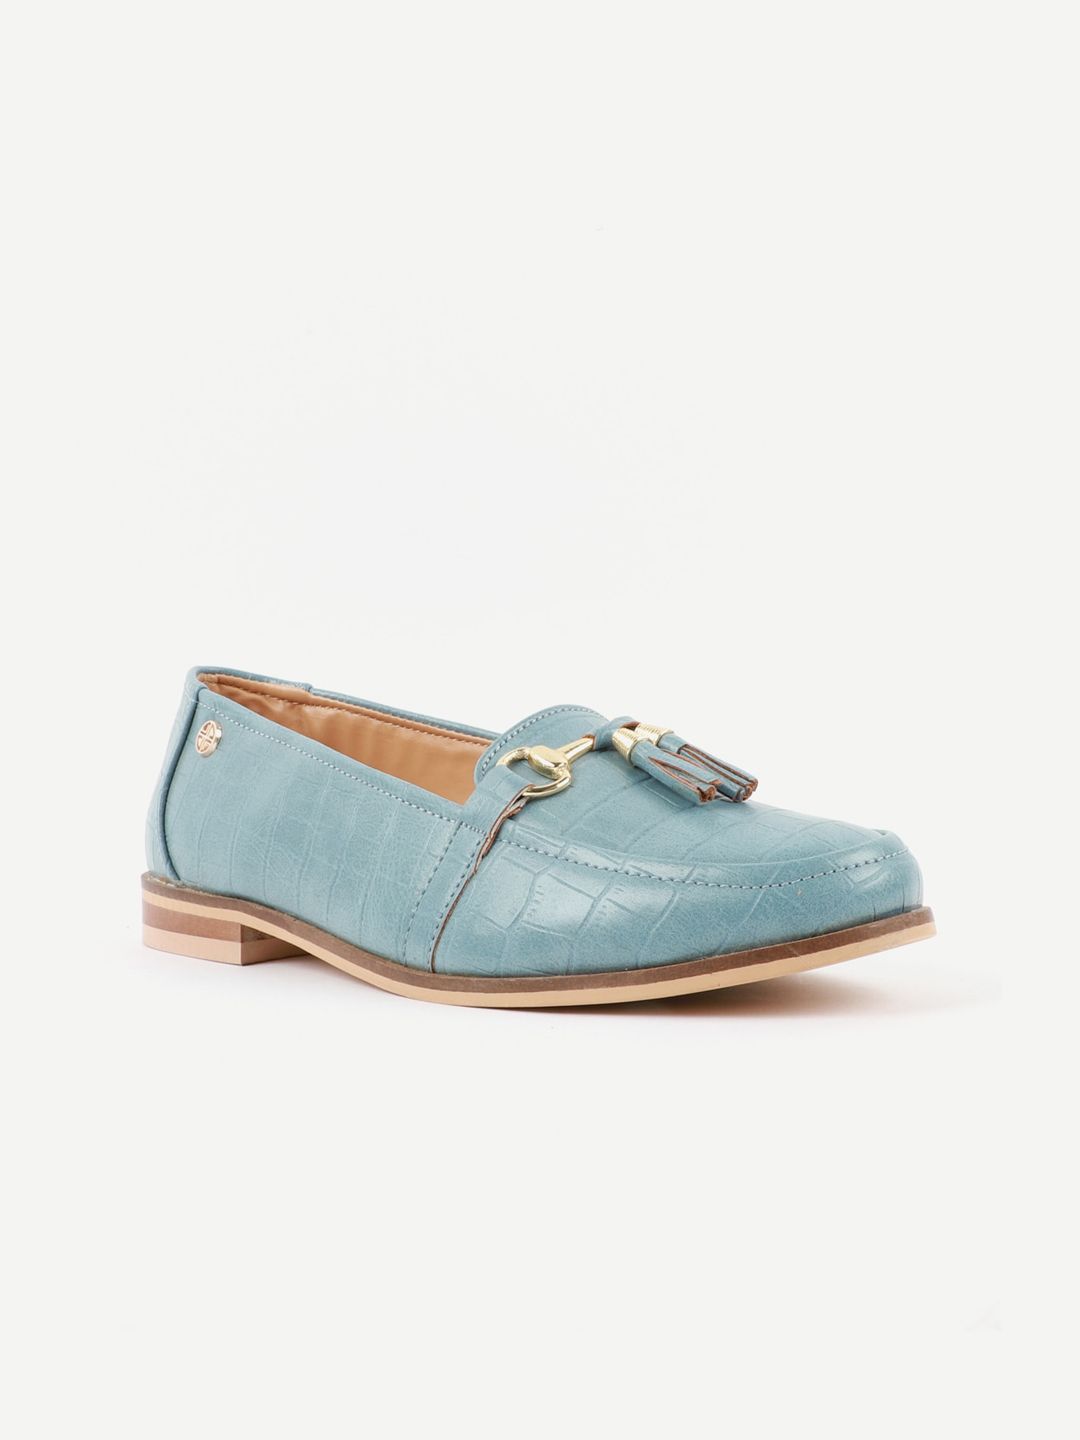 Carlton London Women Blue Textured Lightweight Loafers Price in India